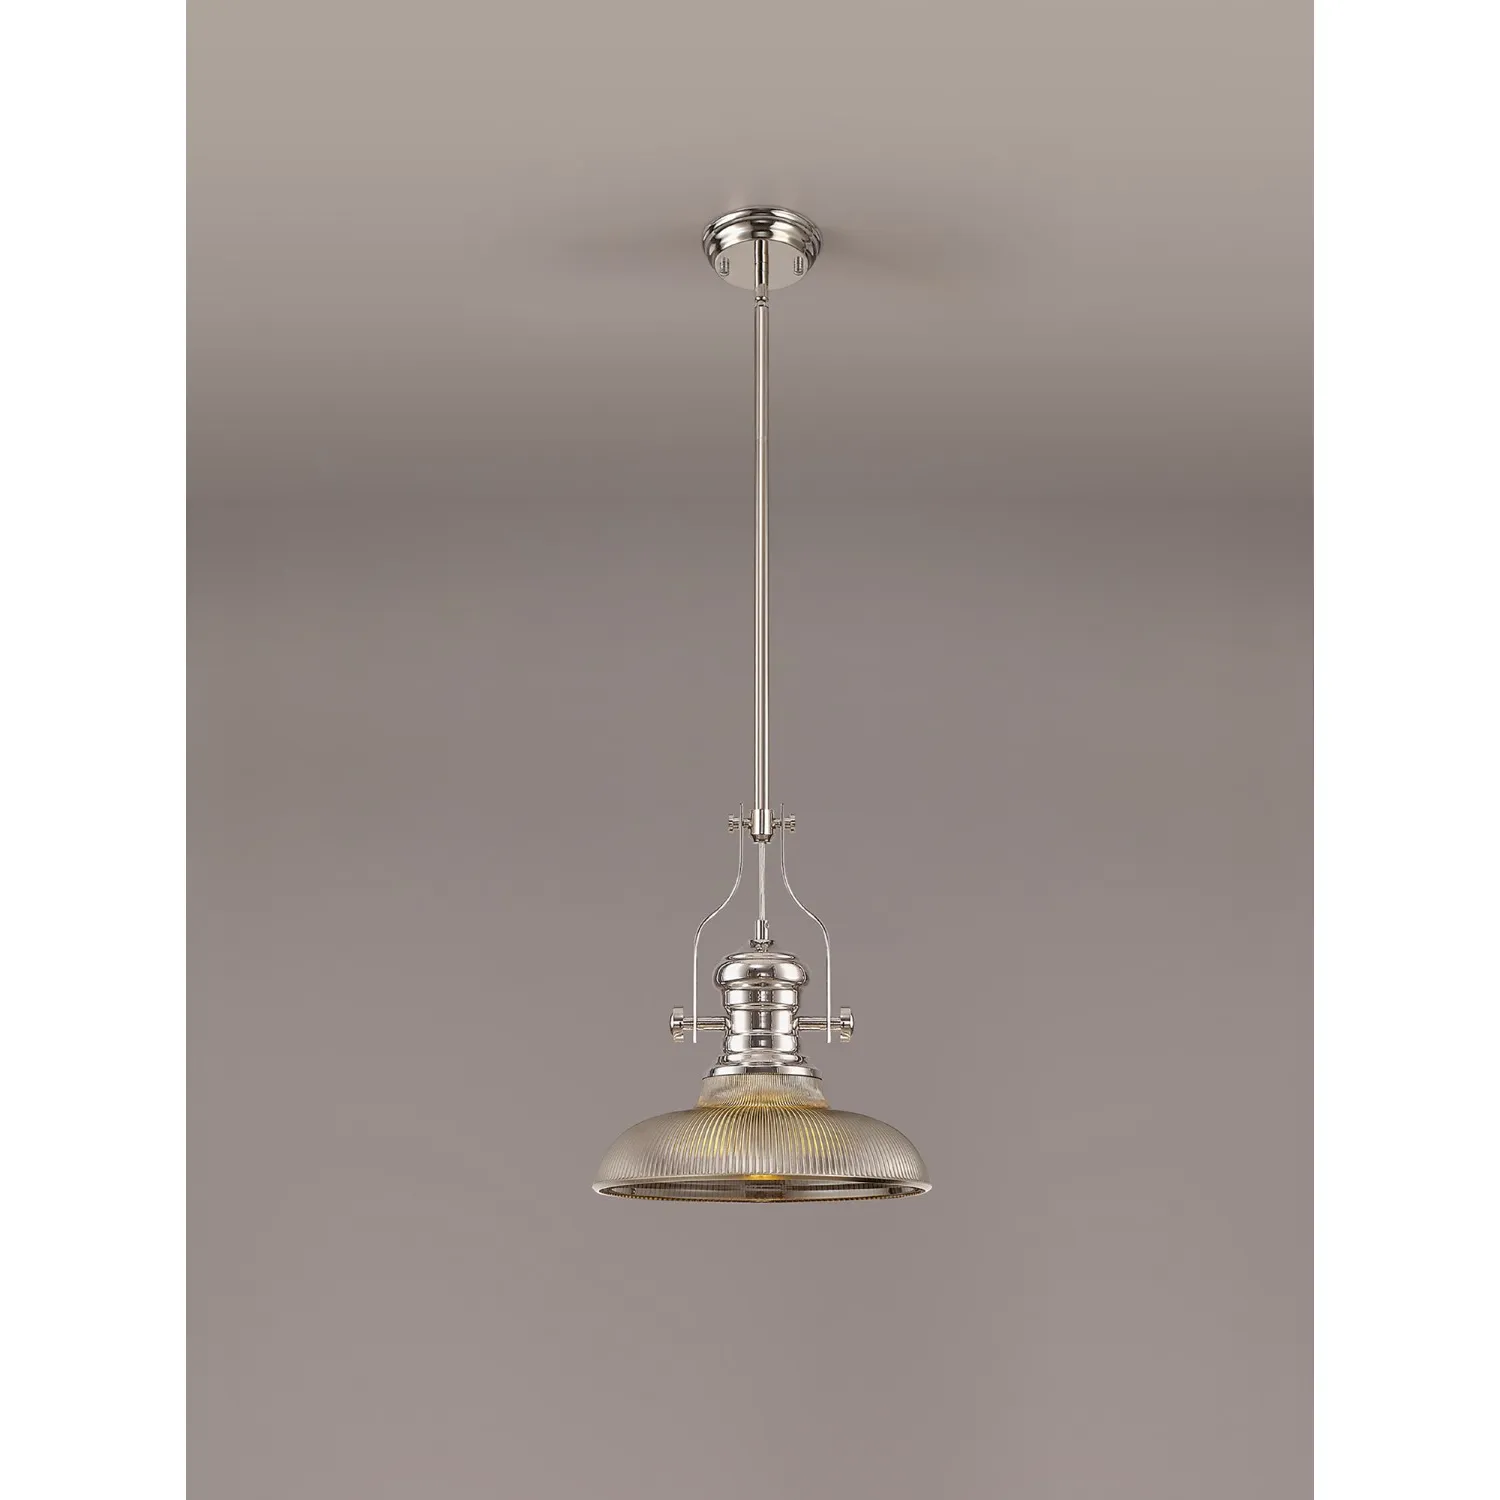 Sandy 1 Light Pendant E27 With 30cm Round Glass Shade, Polished Nickel Smoked